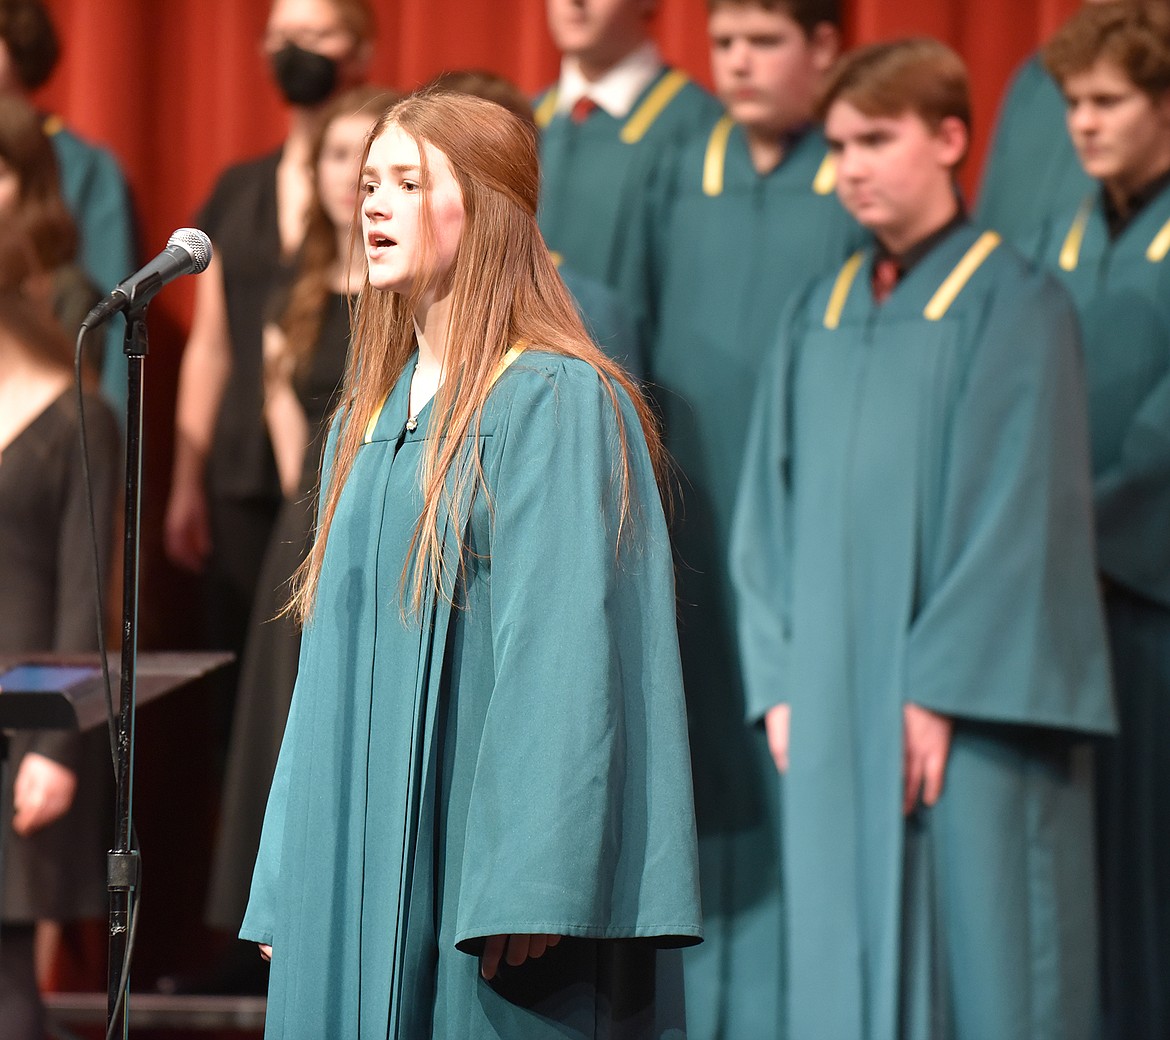 Whitefish High School choir member Rayna Mercer sings a solo during “Castleton Carol” during the Whitefish Schools choir winter concert at the Whitefish Performing Arts Center. (Heidi Desch/Whitefish Pilot)